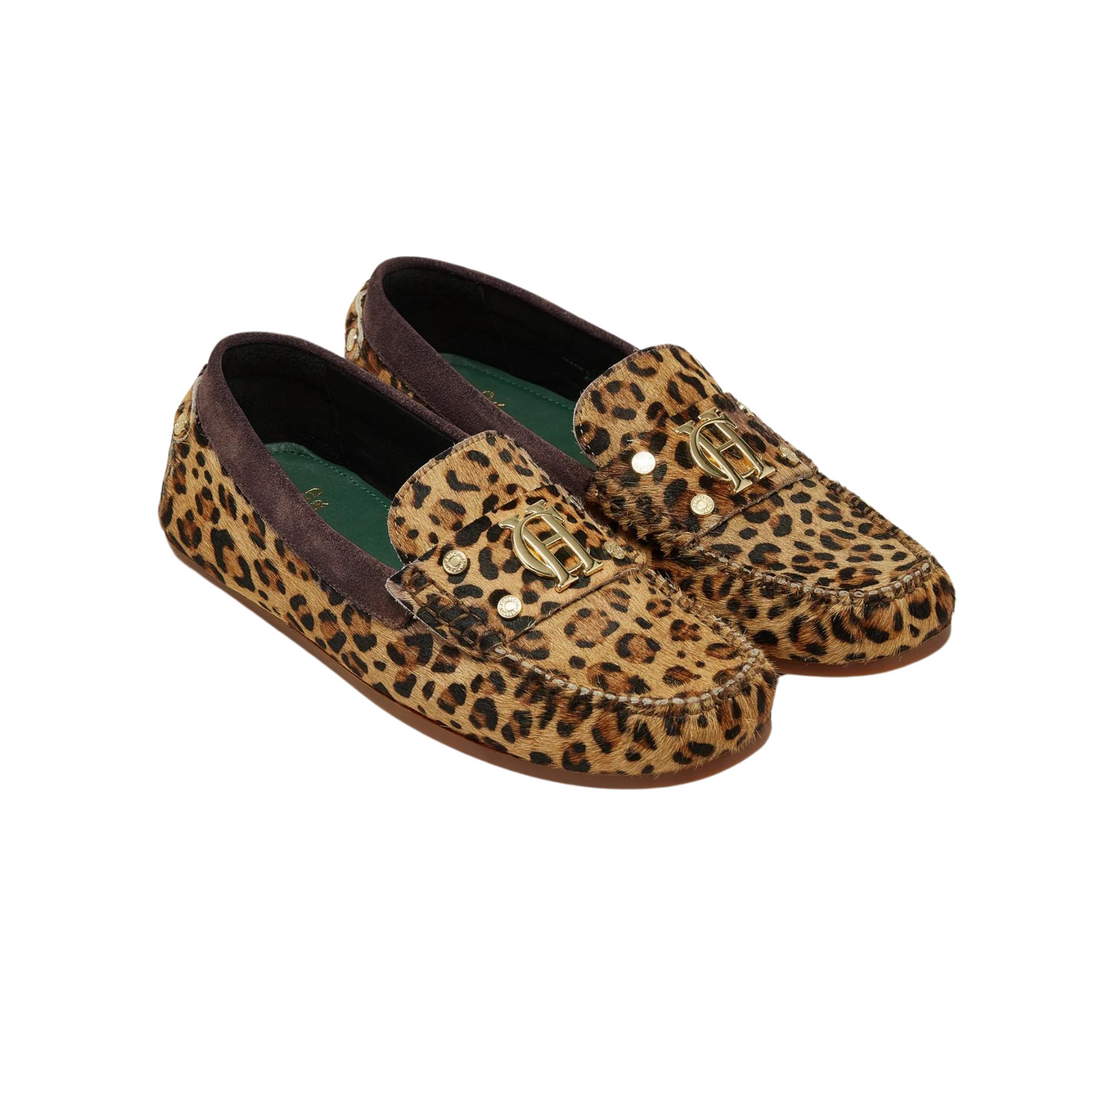 The Driving Loafer Leopard Pony